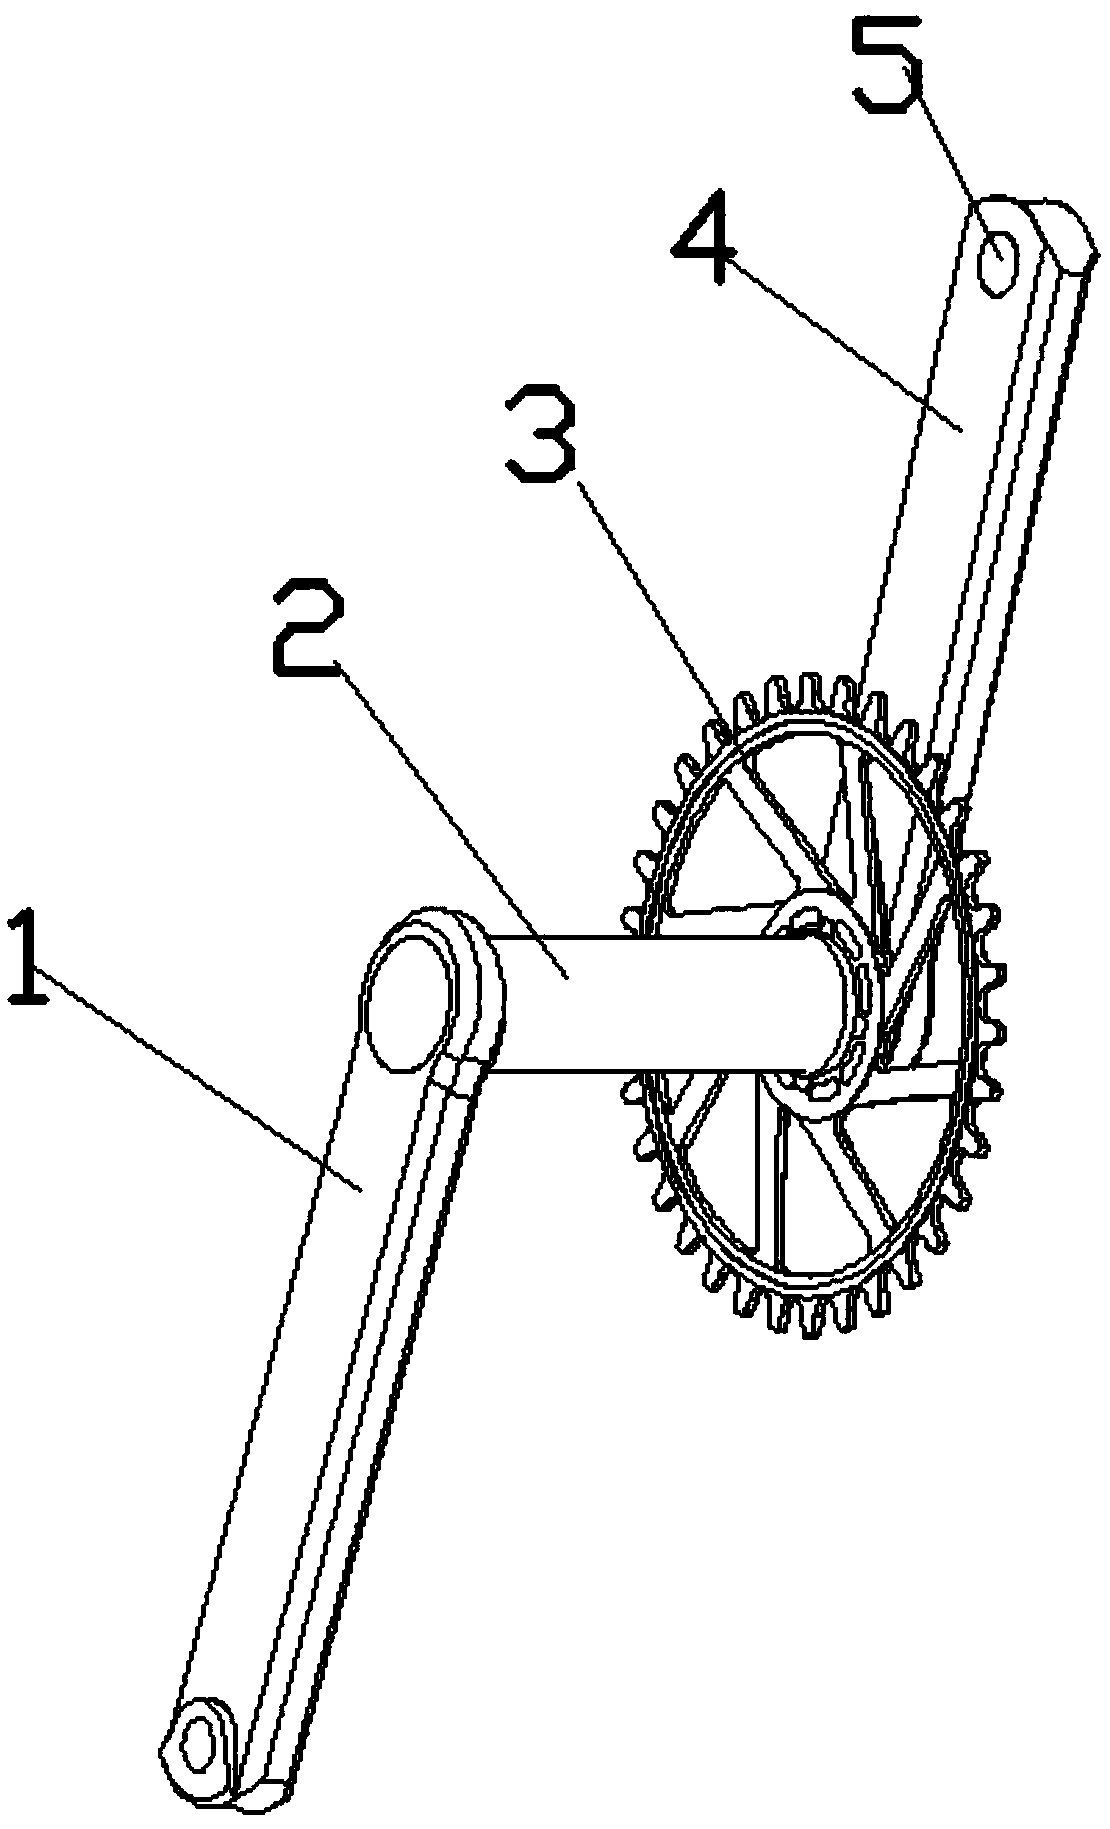 Bicycle crank shaft rod assembly